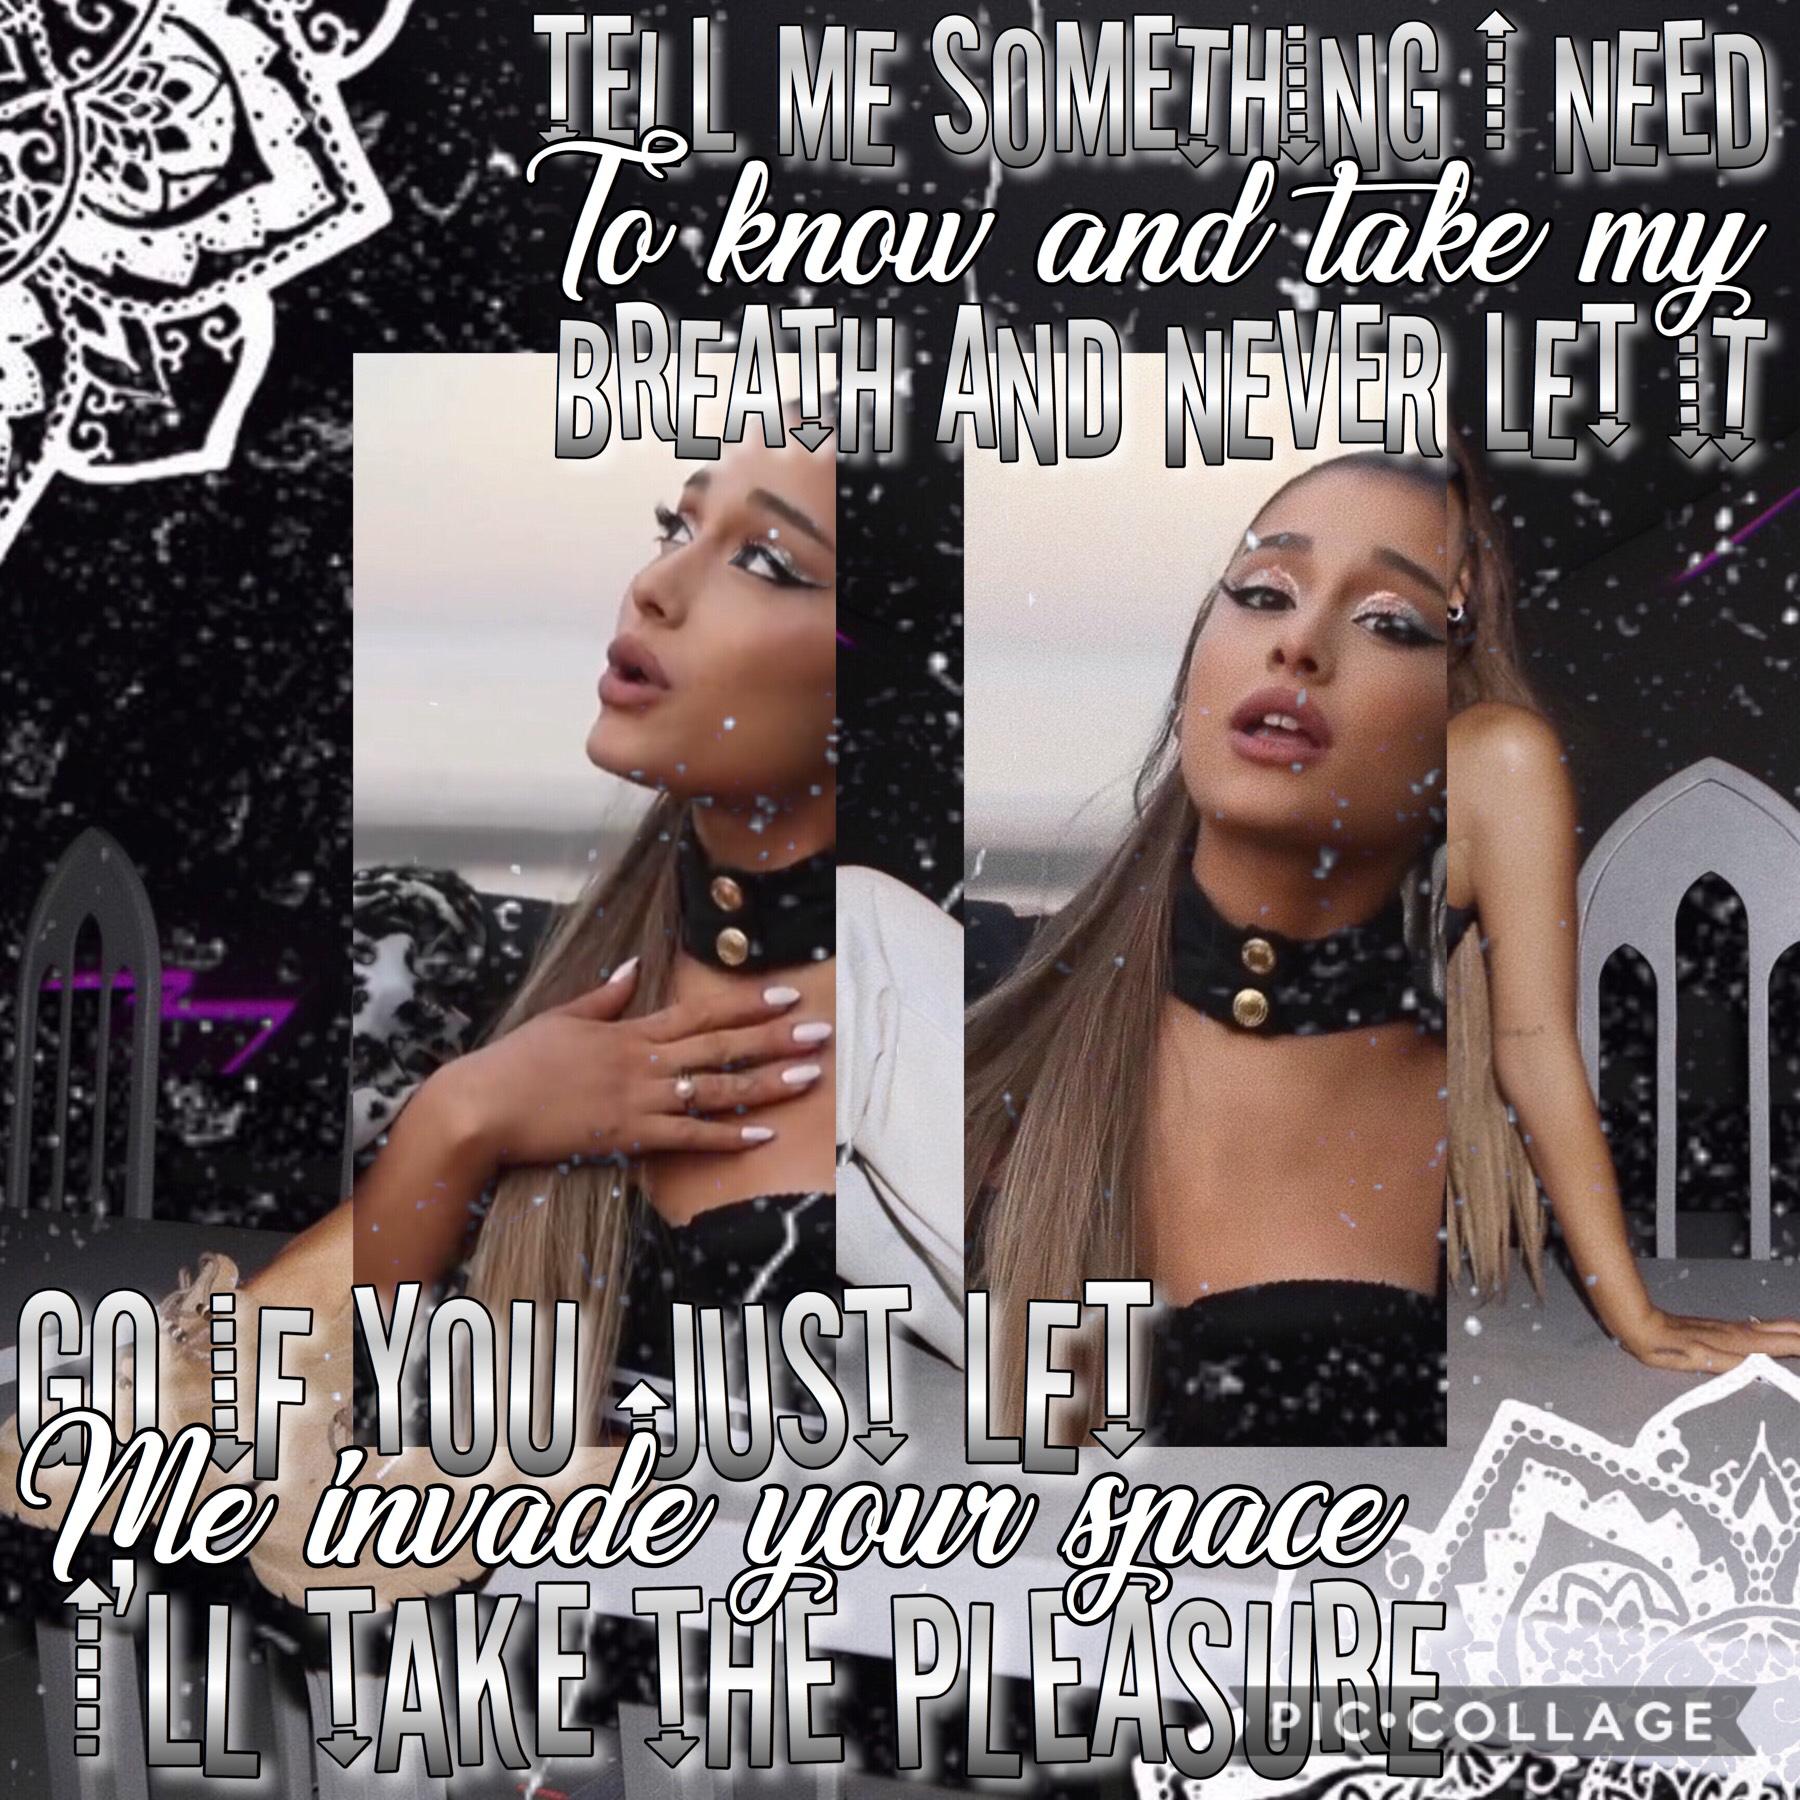 TAP HERE KITTENSSS
THIS WAS FOR A COLLAB AND I GSVE WONDERFULLY_MAD A HARD ONE LOL SO HERES MY VERSION OF MY EDIT HOPE U LIKE IT ❤️❤️😘😘